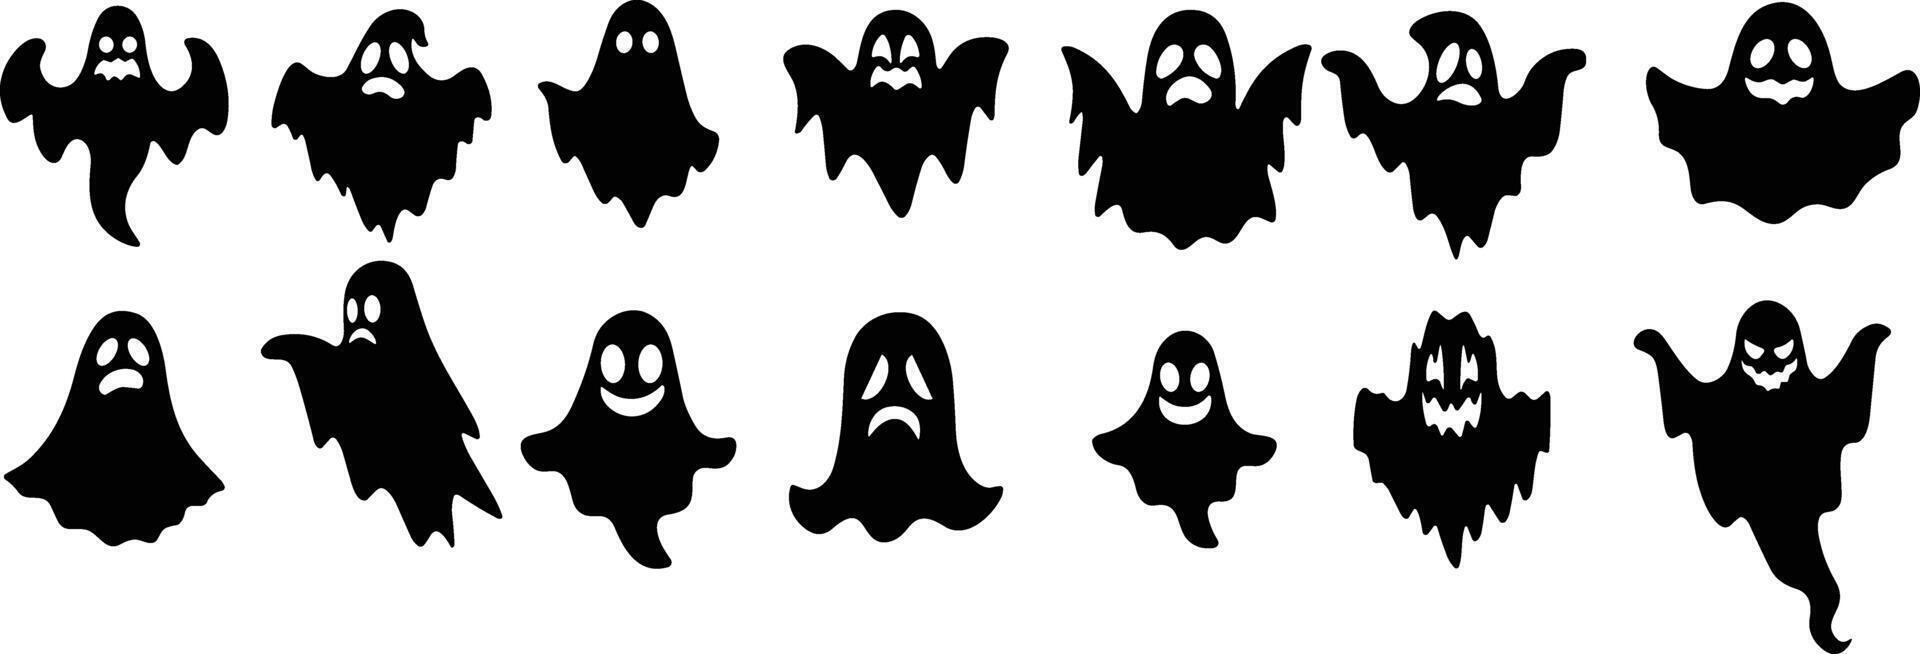 Ghost icon set Vector. Halloween concept, Cartoon Ghosts, black ghost with eyes, spooky character, ghoul or spirit monsters silhouettes with spooky faces. Horror holiday flying phantoms or nightmare vector